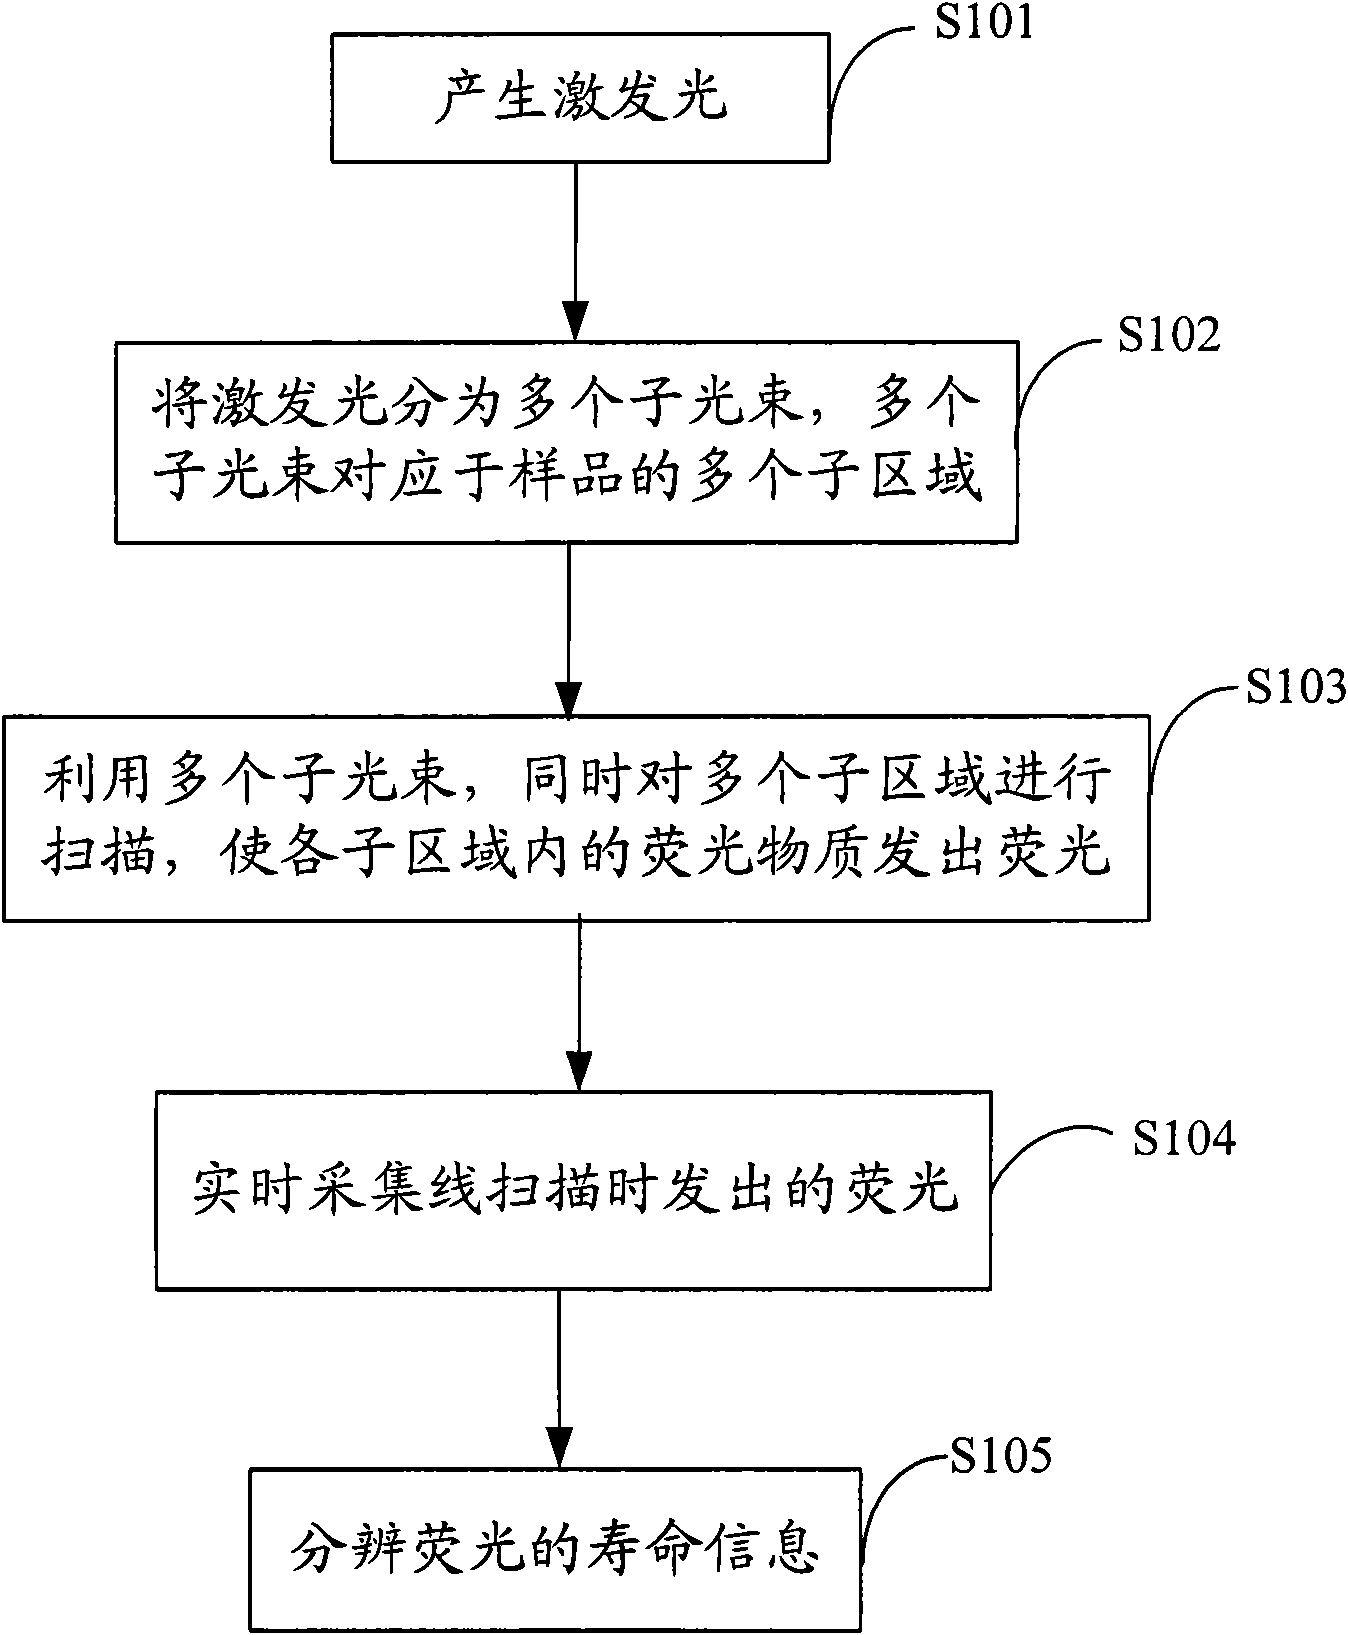 Method and system for measuring fluorescence service life